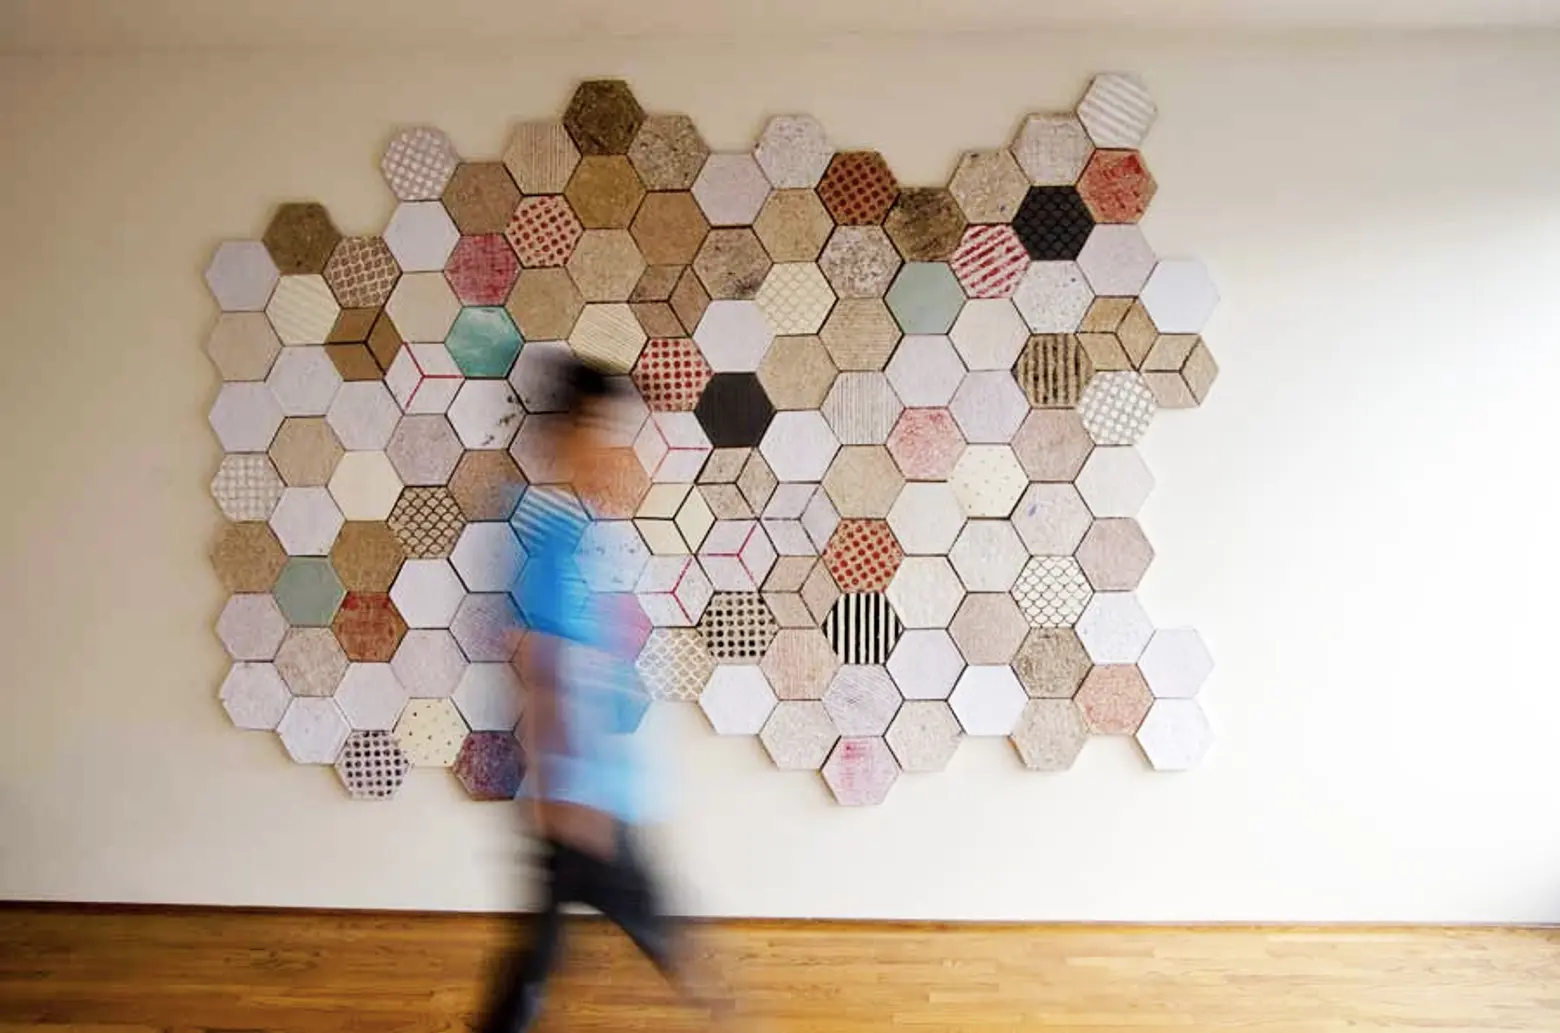 Wallpapering: Decorate Your Space with These Quirky Paper Tiles by Dear Human